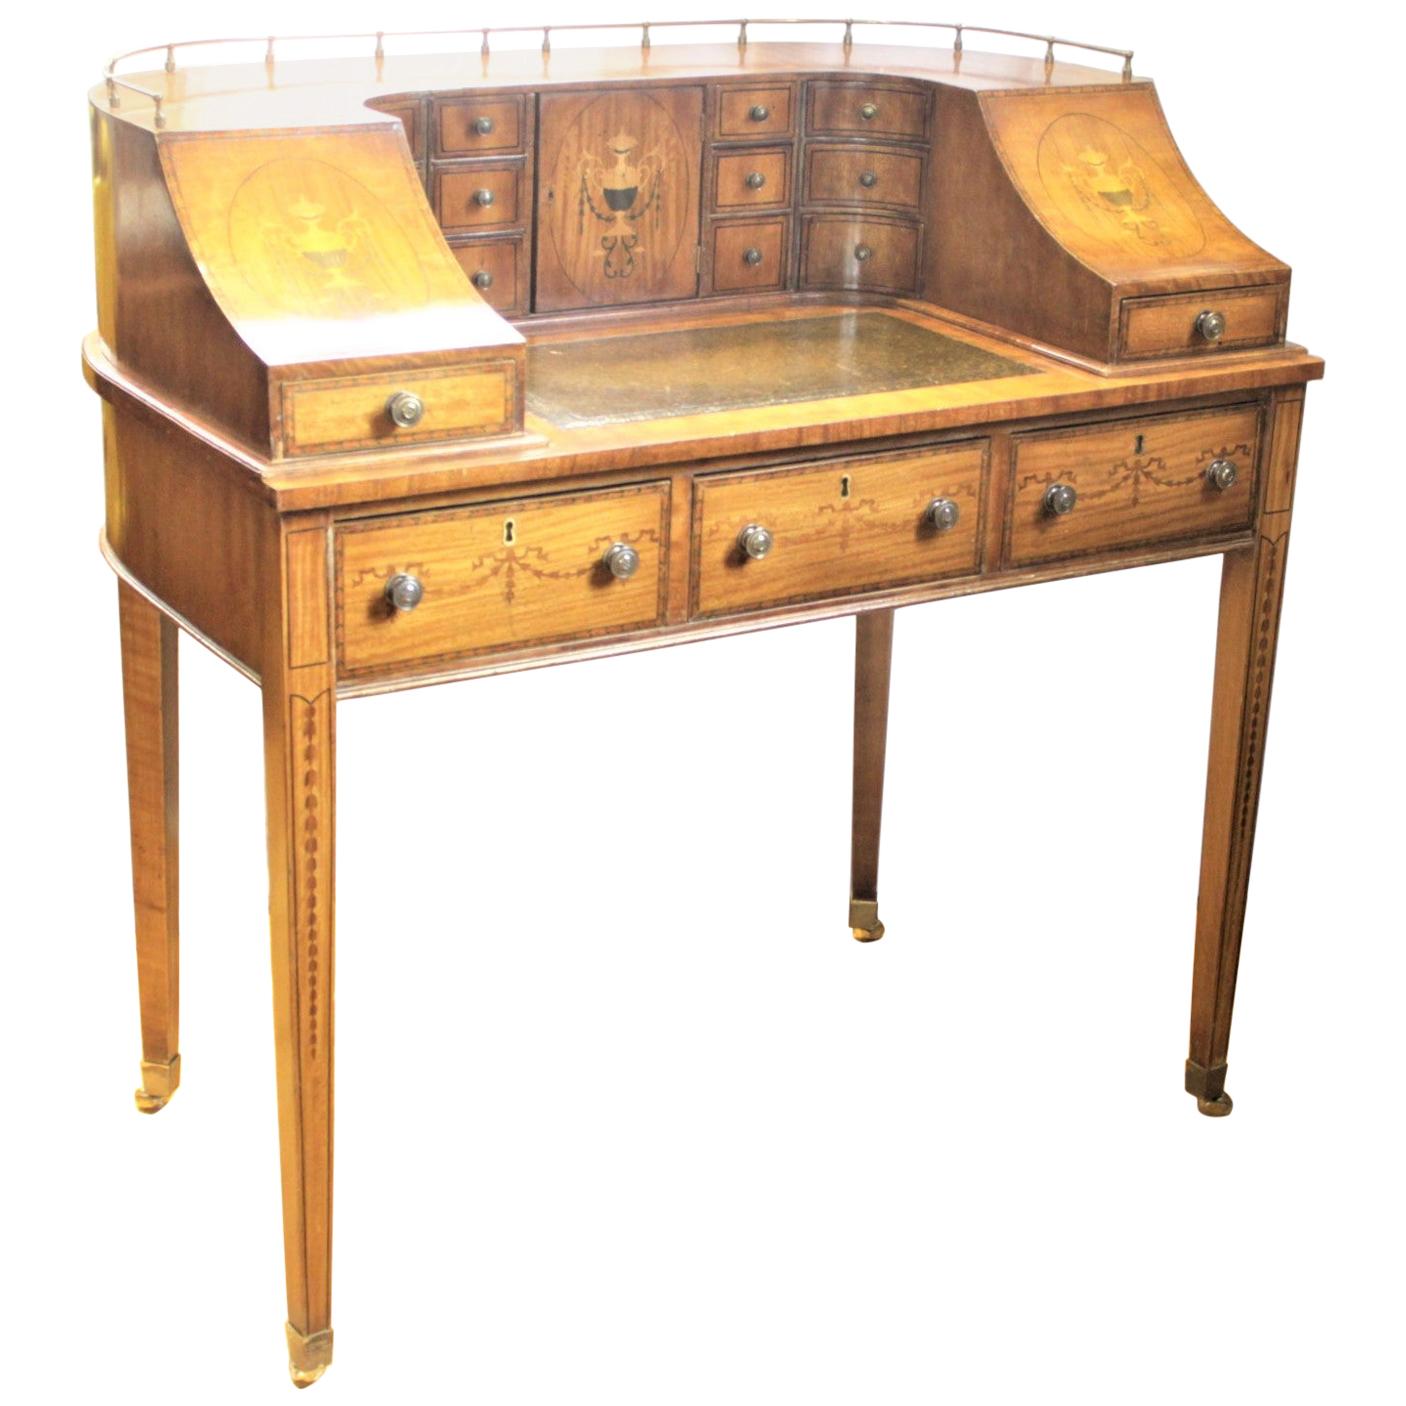 Antique English Carlton House Desk with Marquetry & Brass Accents